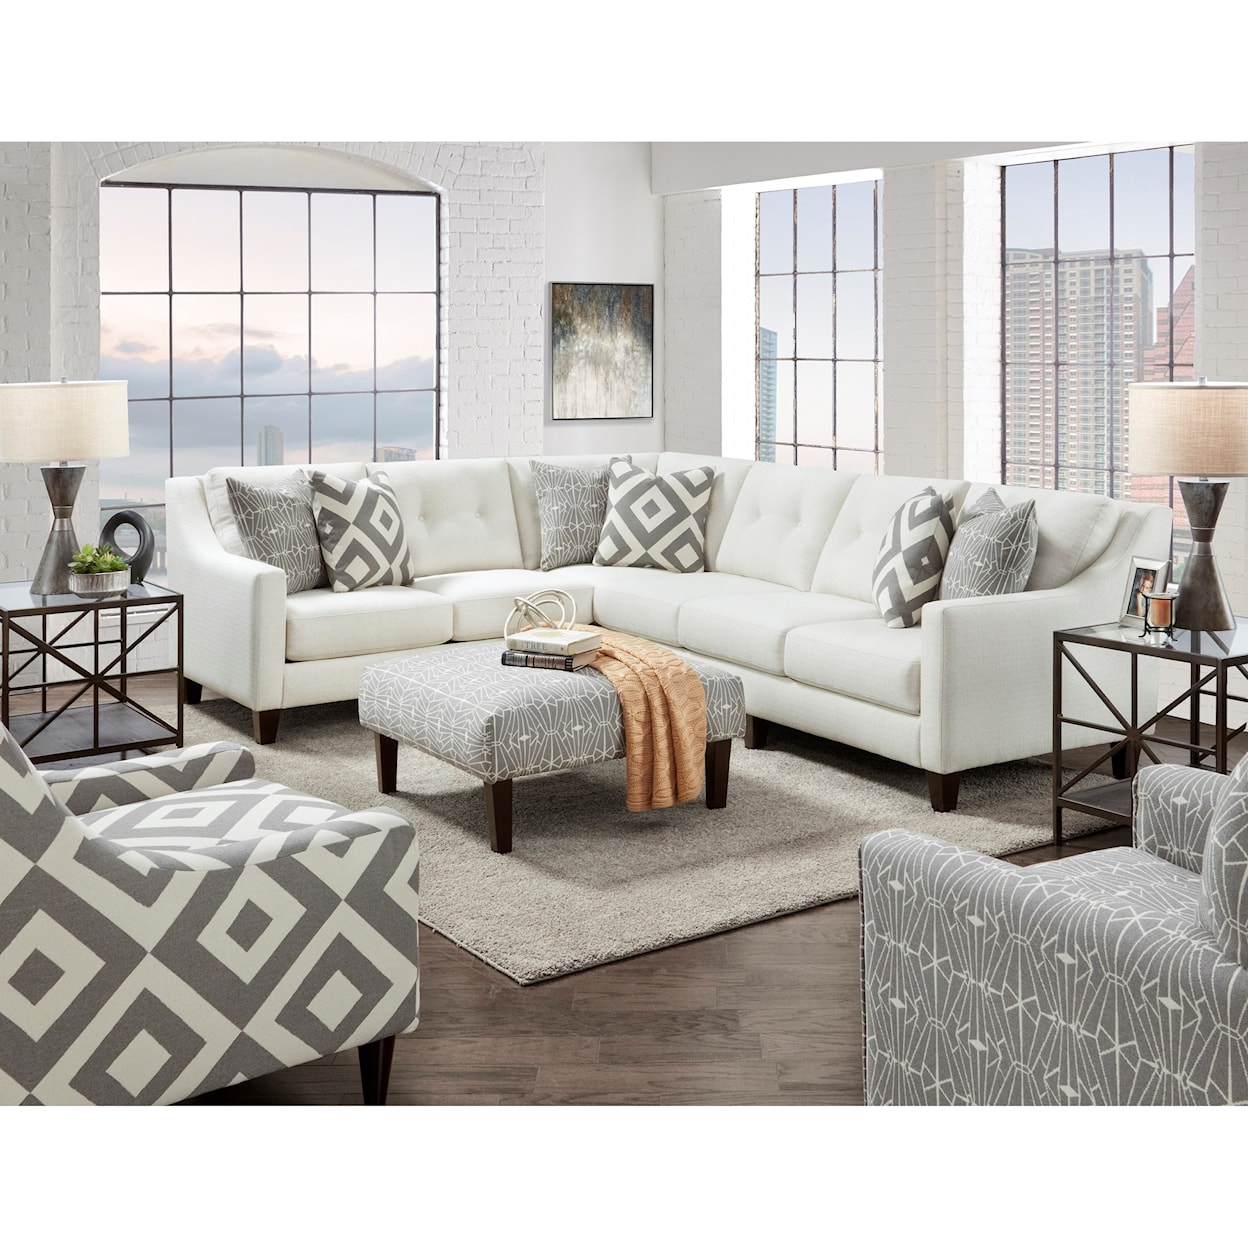 Fusion Furniture 3280B Living Room Group